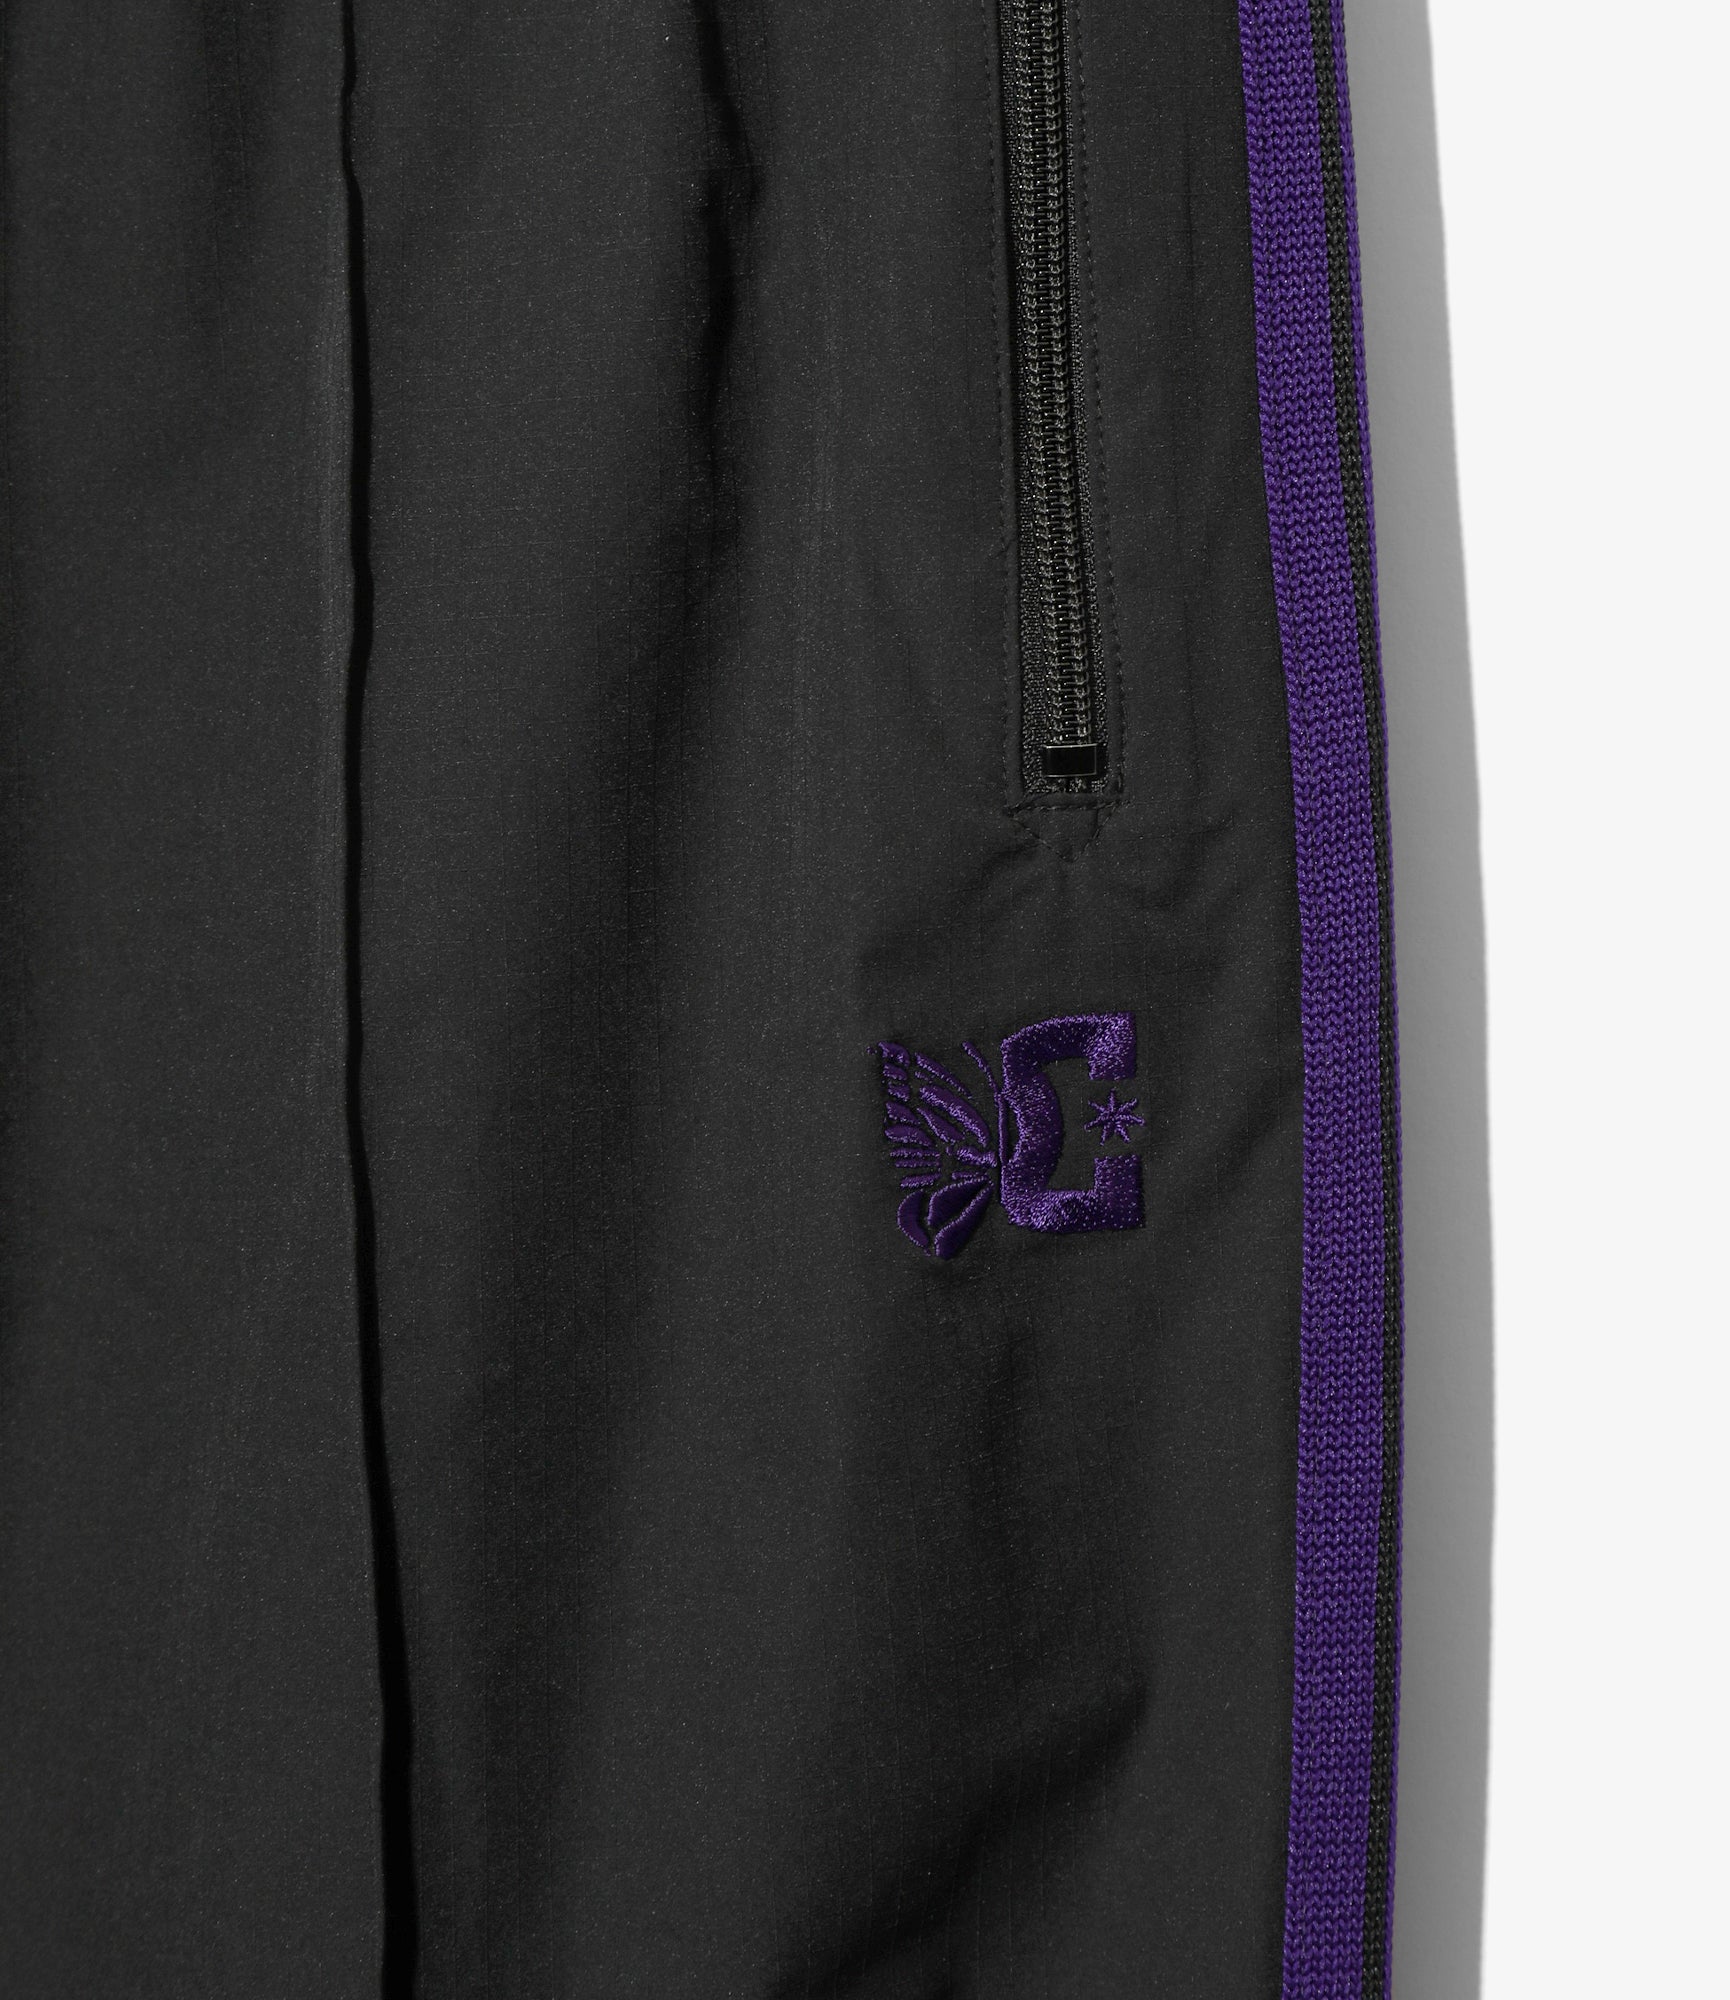 Needles x DC Shoes Track Pant - Poly Ripstop - Black